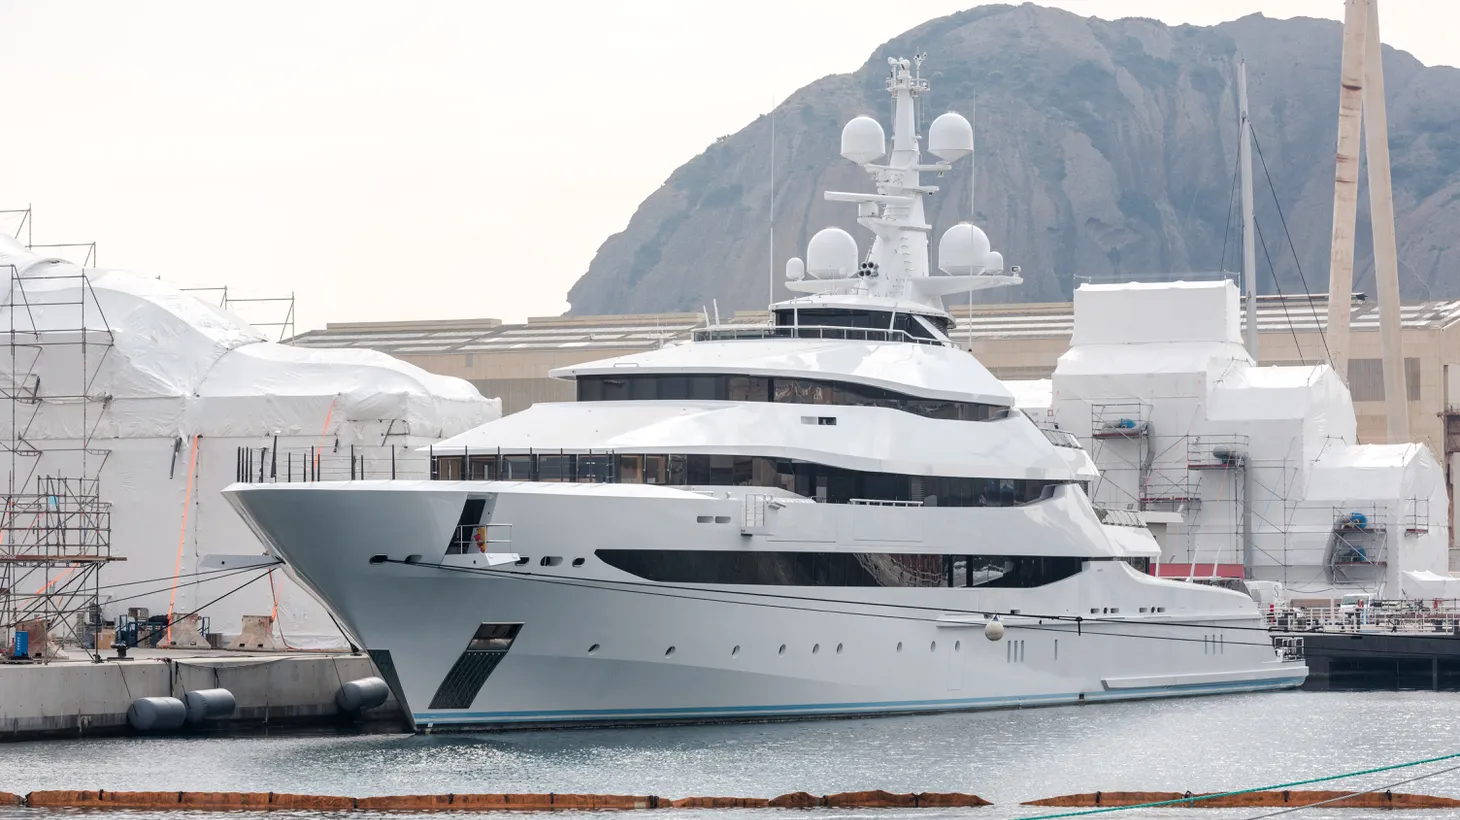 France has proceeded, under the implementation of European sanctions against Russia, to the seizure of a yacht linked to the Russian oligarch Igor Sechin, boss of the oil giant Rosneft. The almost 86-meter luxury yacht was in a shipyard in La Ciotat, in the south of France, March 4, 2022.